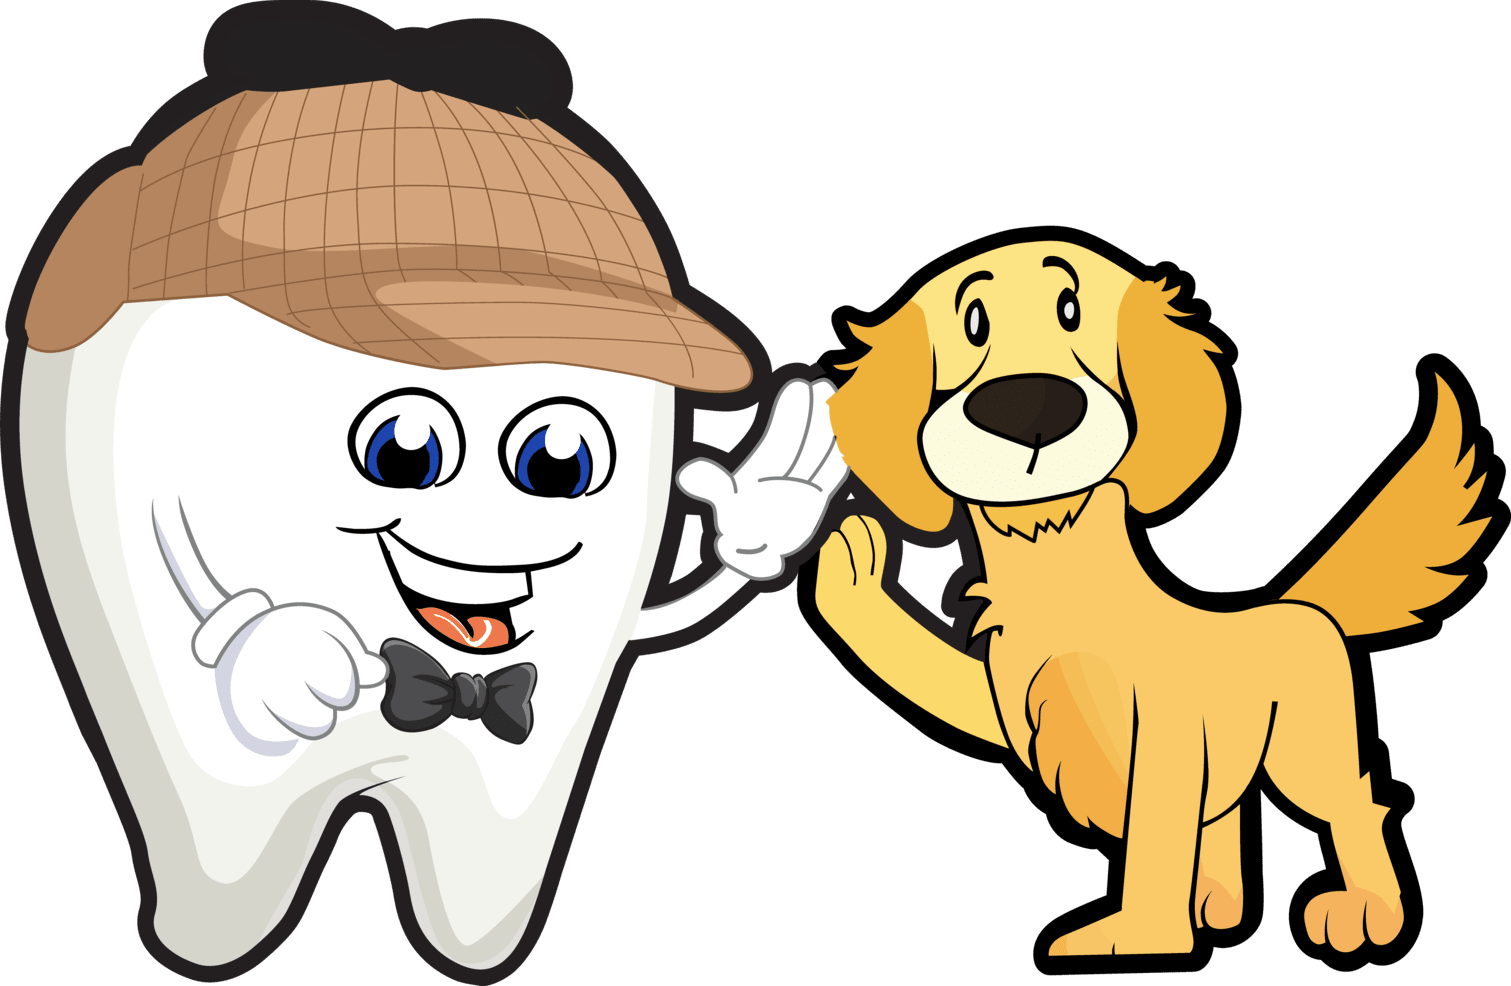 Sherlock Tooth | Tooth Holding Magnifying Glass | Tooth With A Hat | Cavity Detective | Best Pediatric Dentist In Tinton Falls, NJ